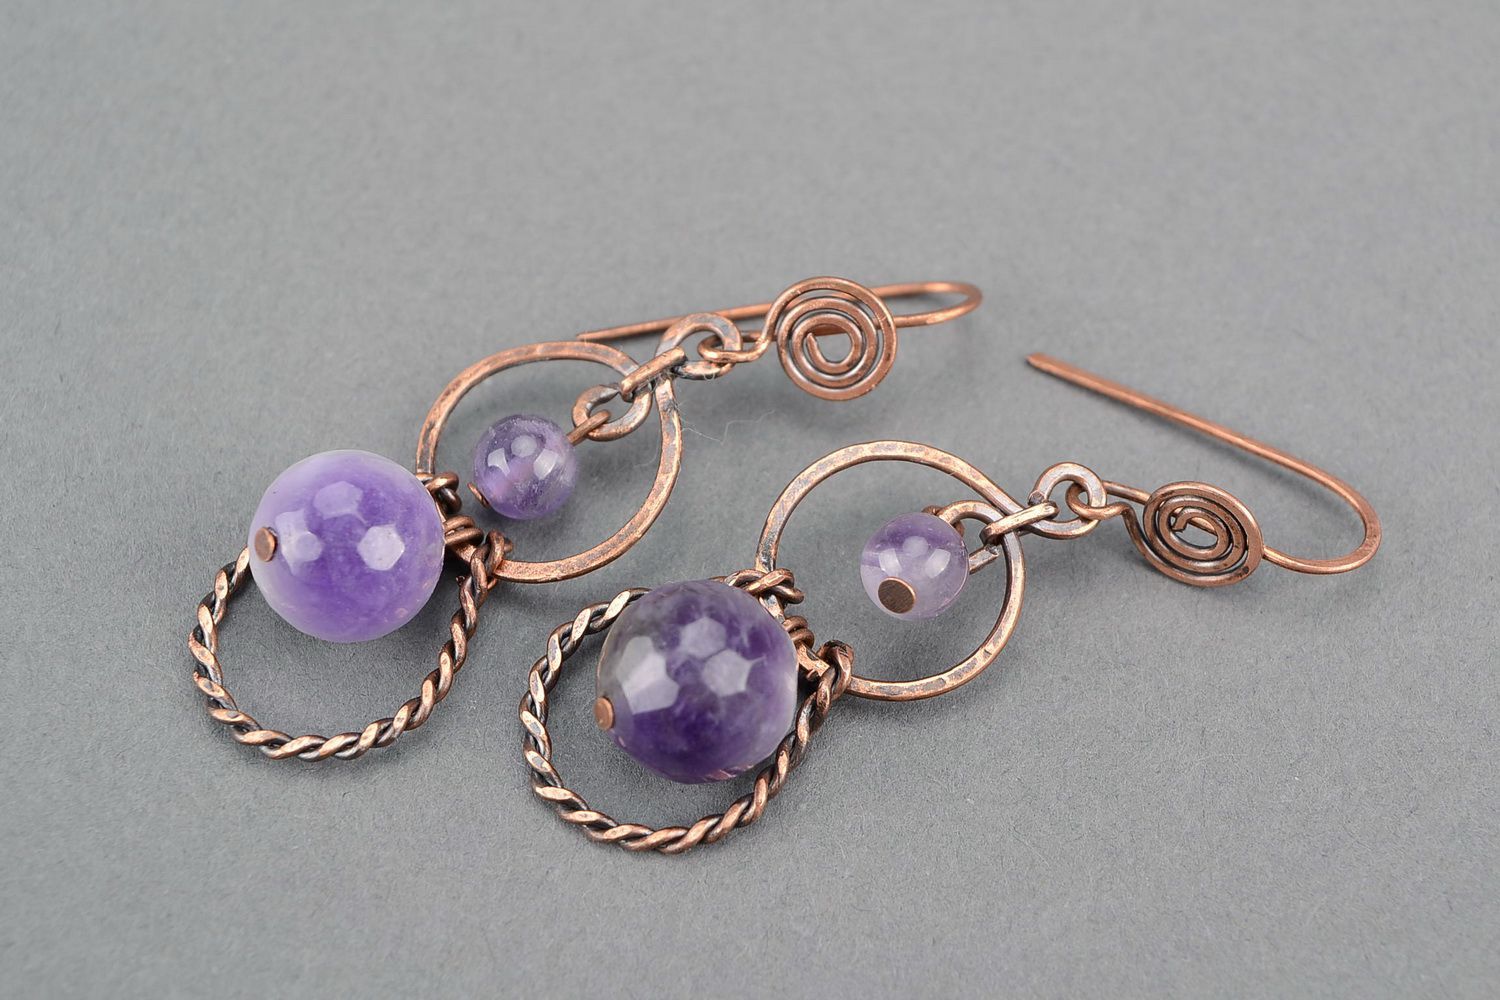 Earrings with amethyst, wire wrap technique photo 4